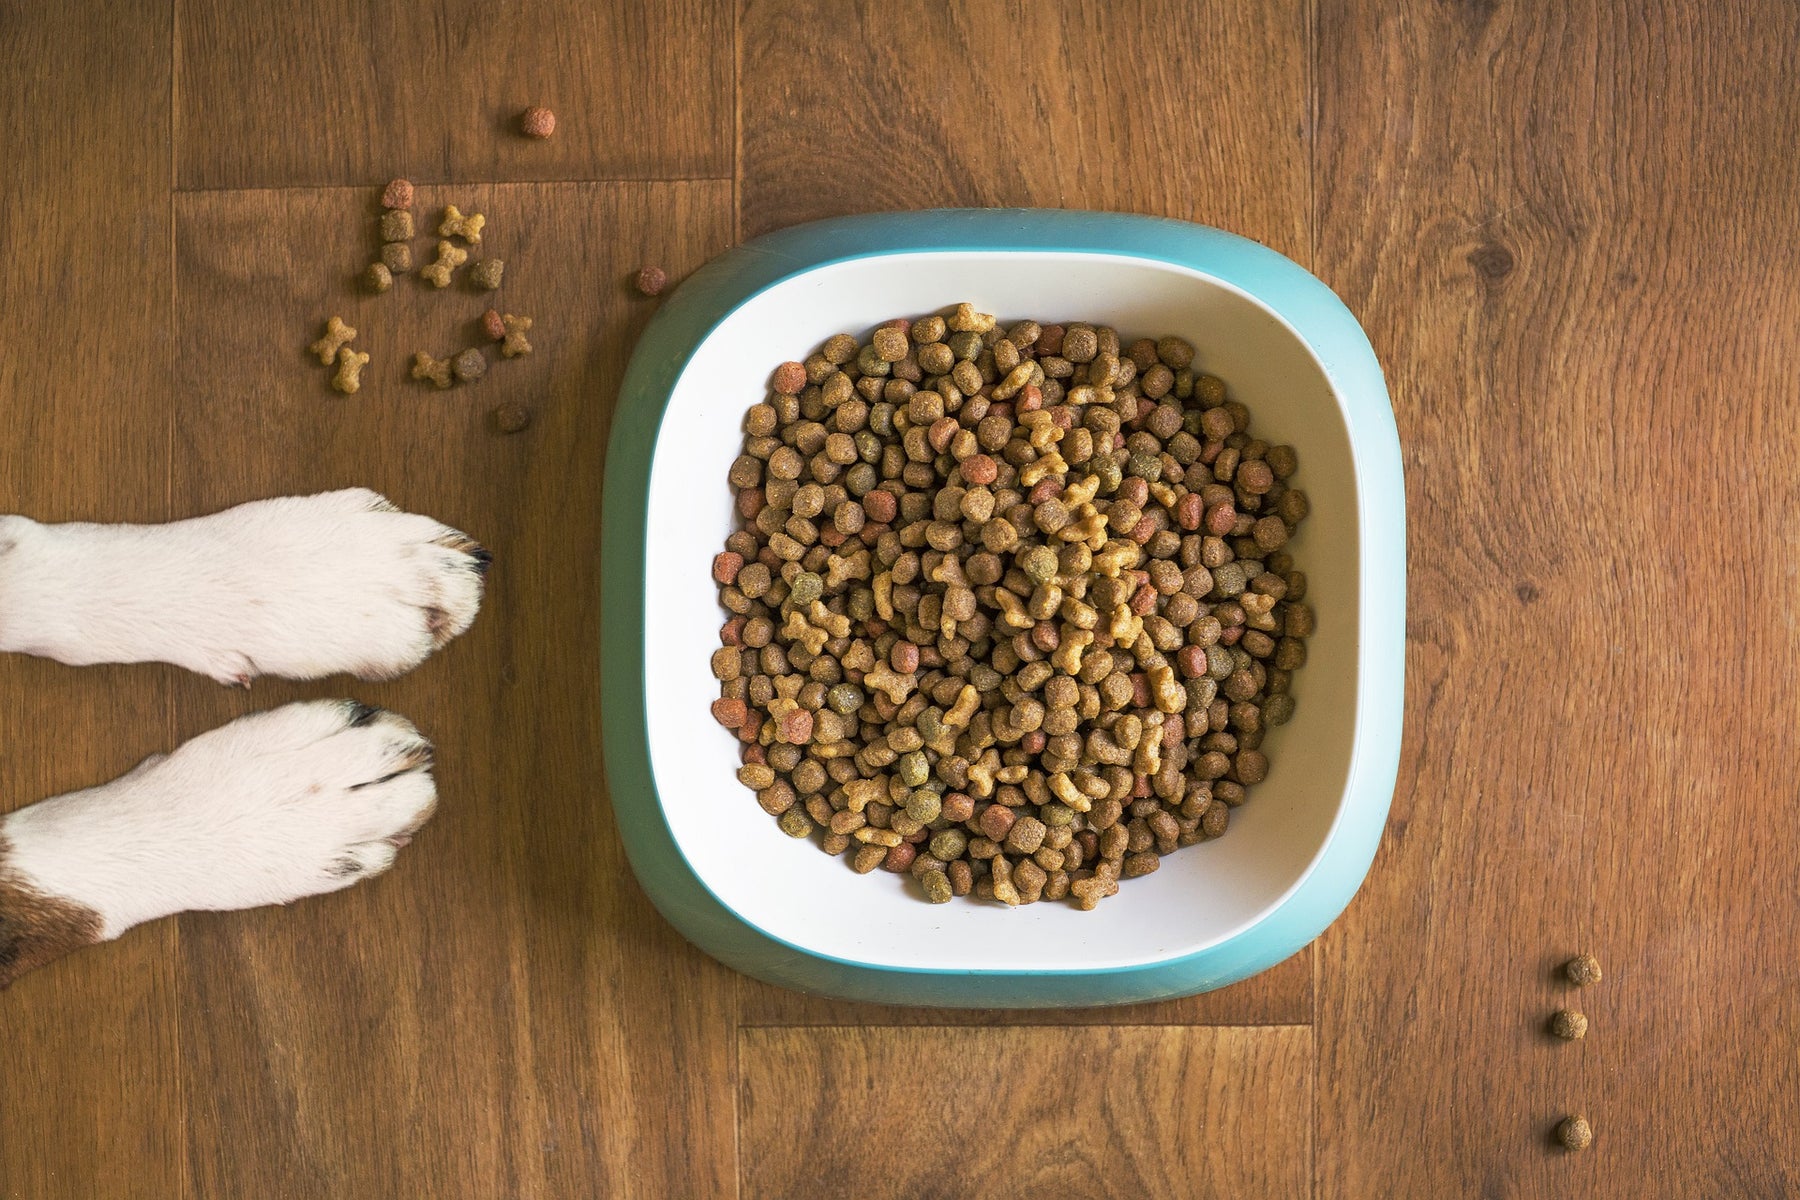 Dog paws next to a bowl of dog food